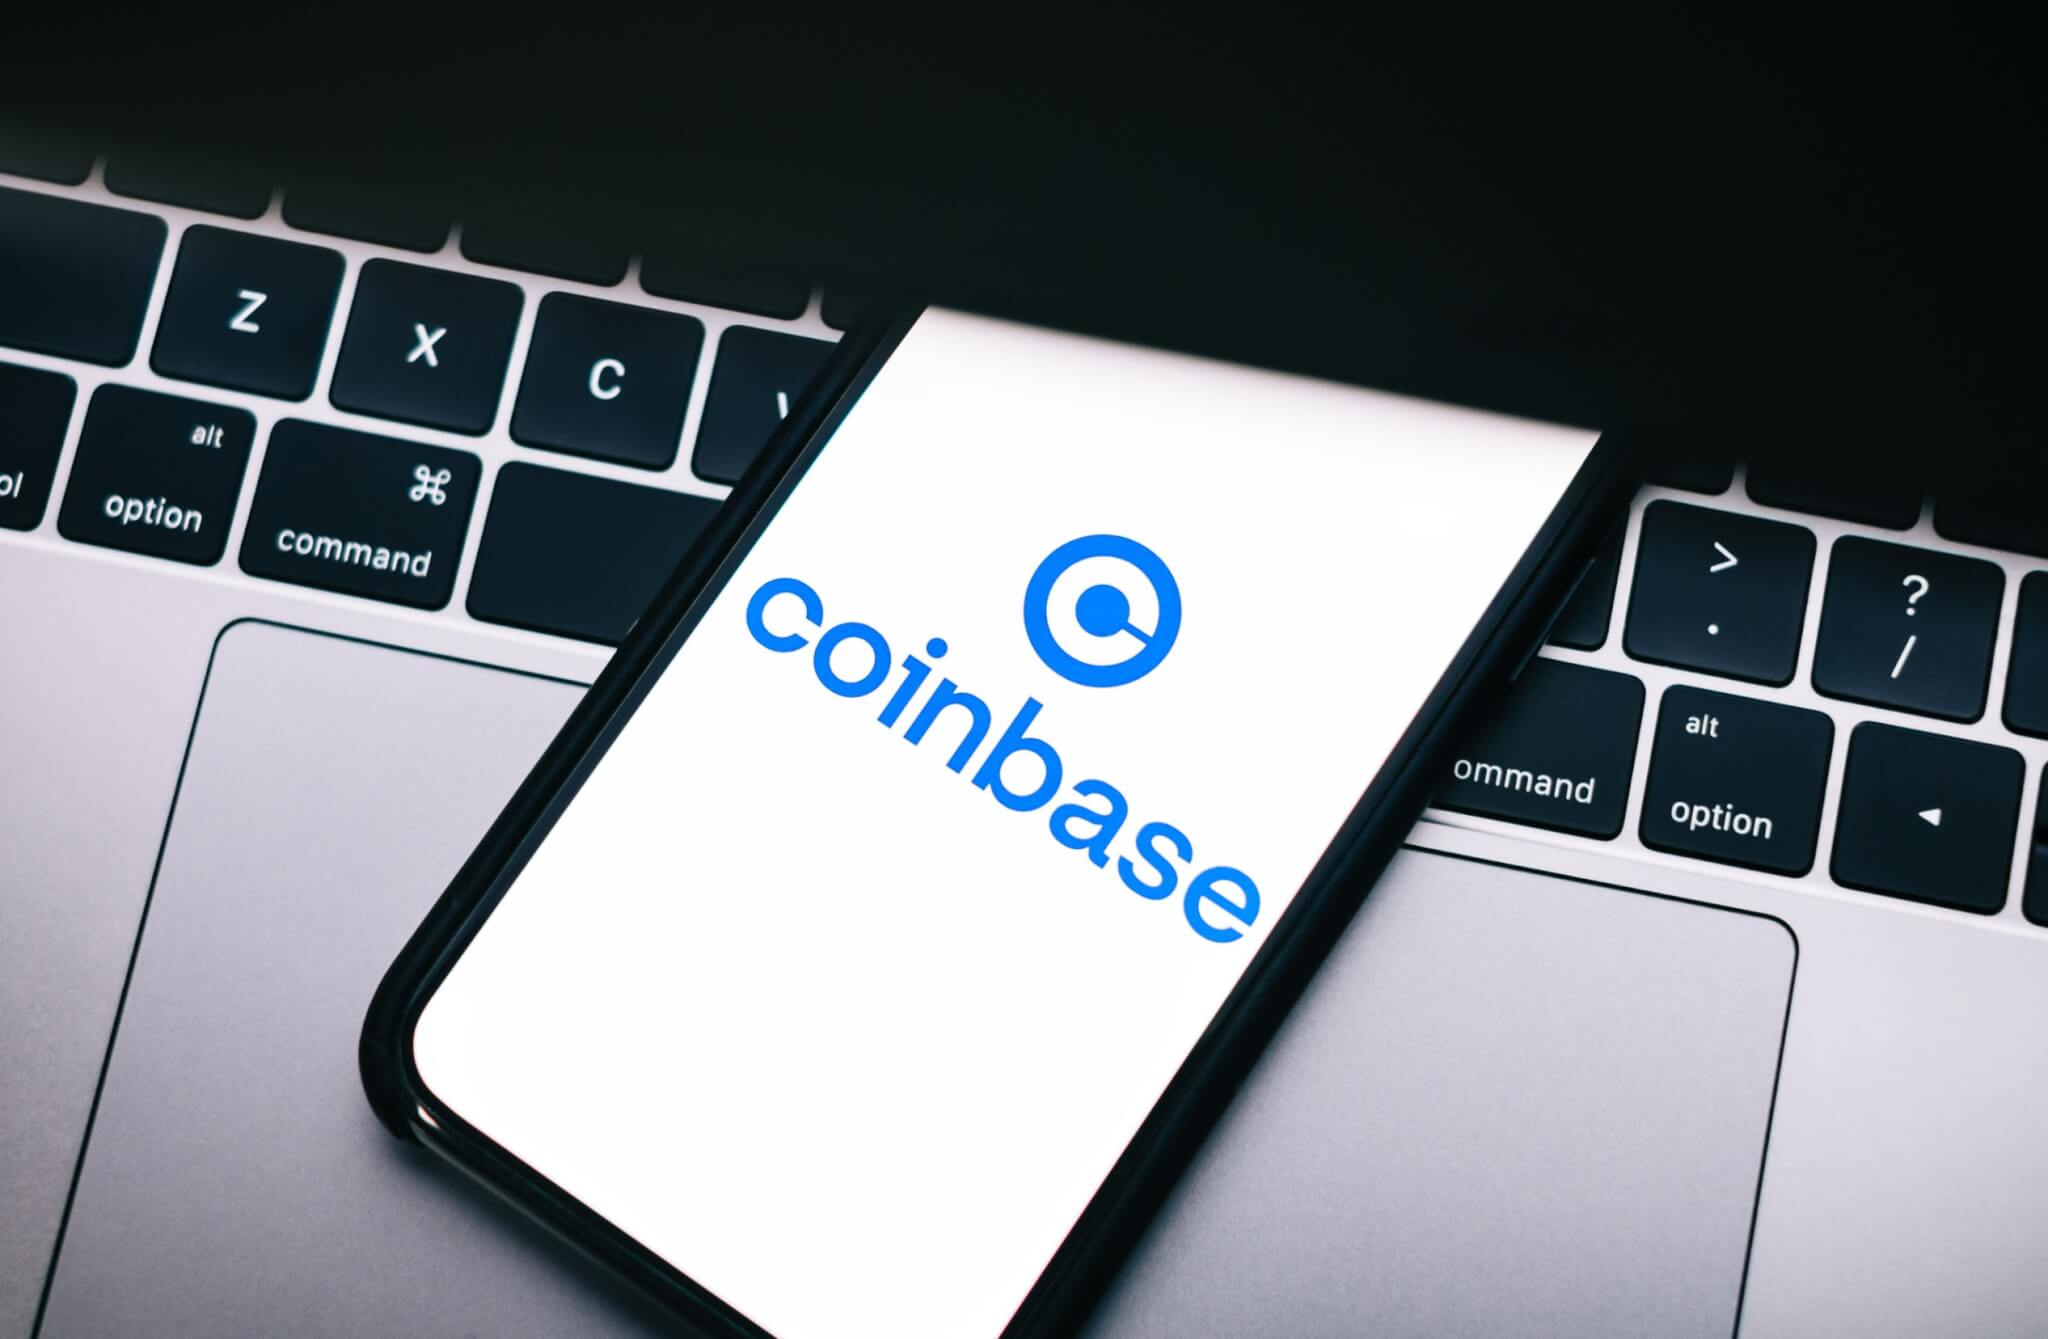 coinbase stock could drop to $60 analysts say